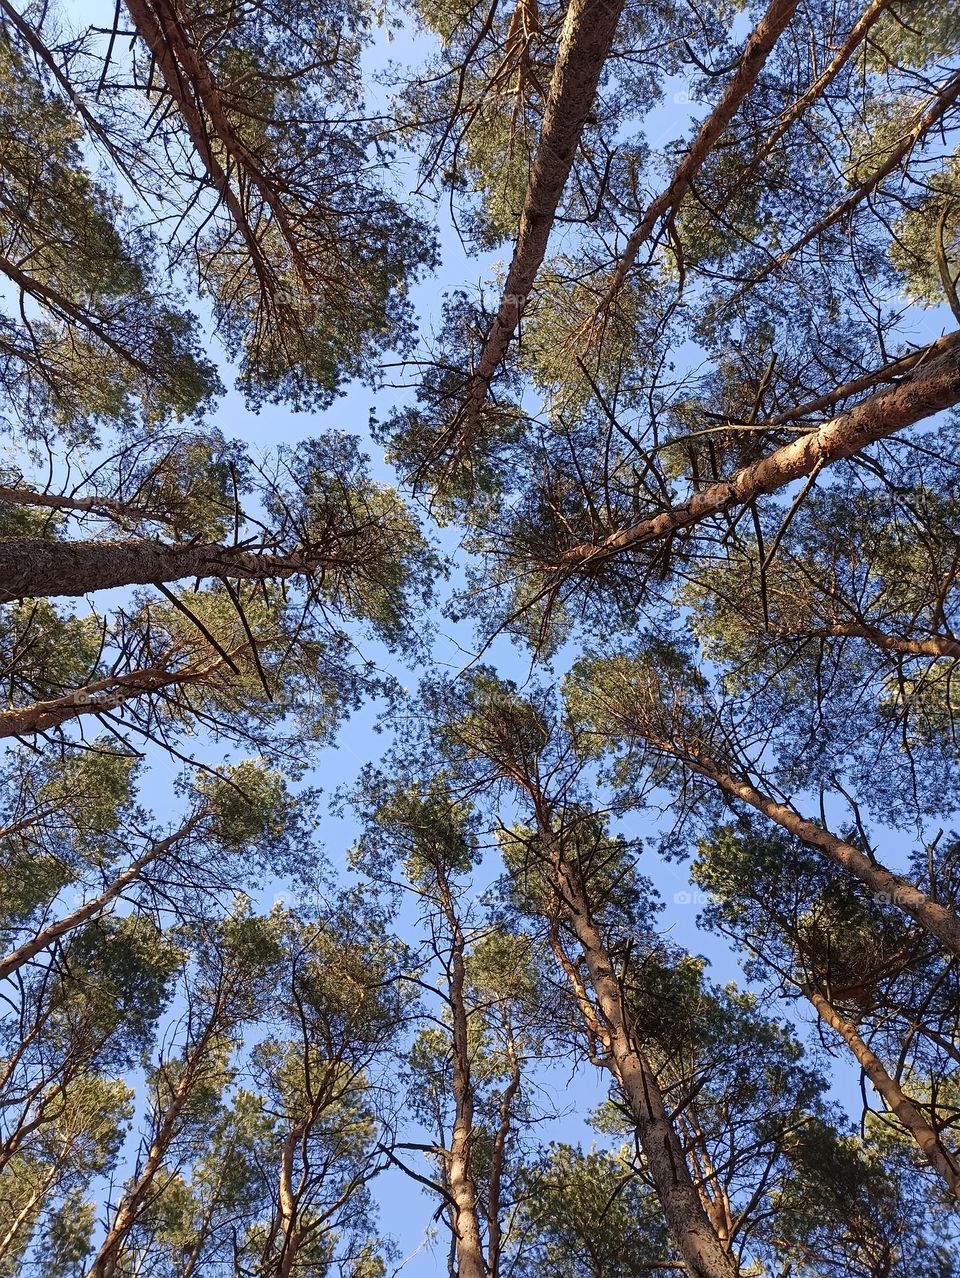 forest pines trees blue sky background view from the ground